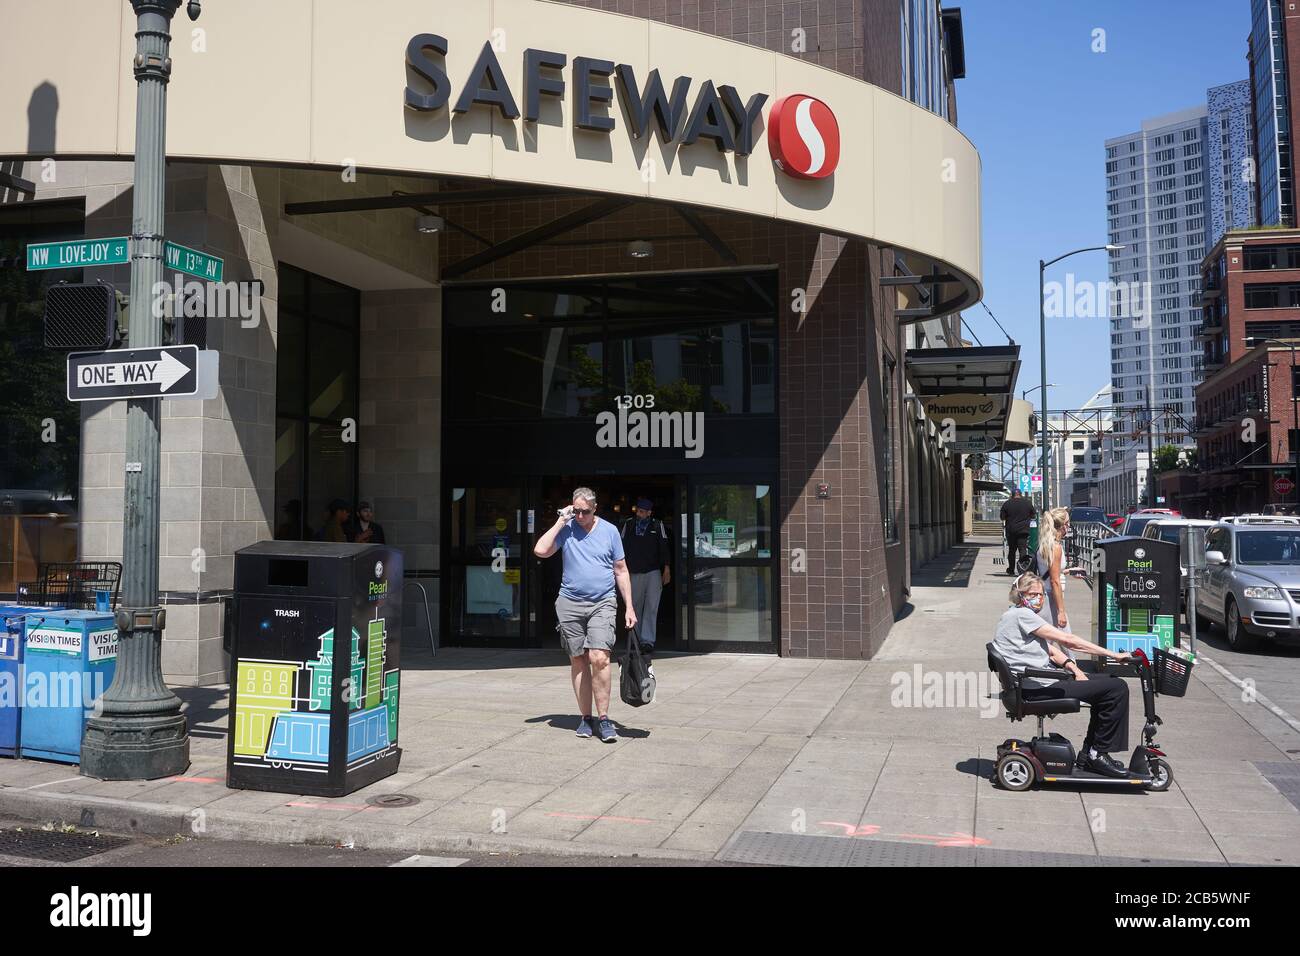 A Safeway supermarket in the Pearl District in Portland, Oregon, on Wednesday, August 5, 2020, during a pandemic summer. Stock Photo